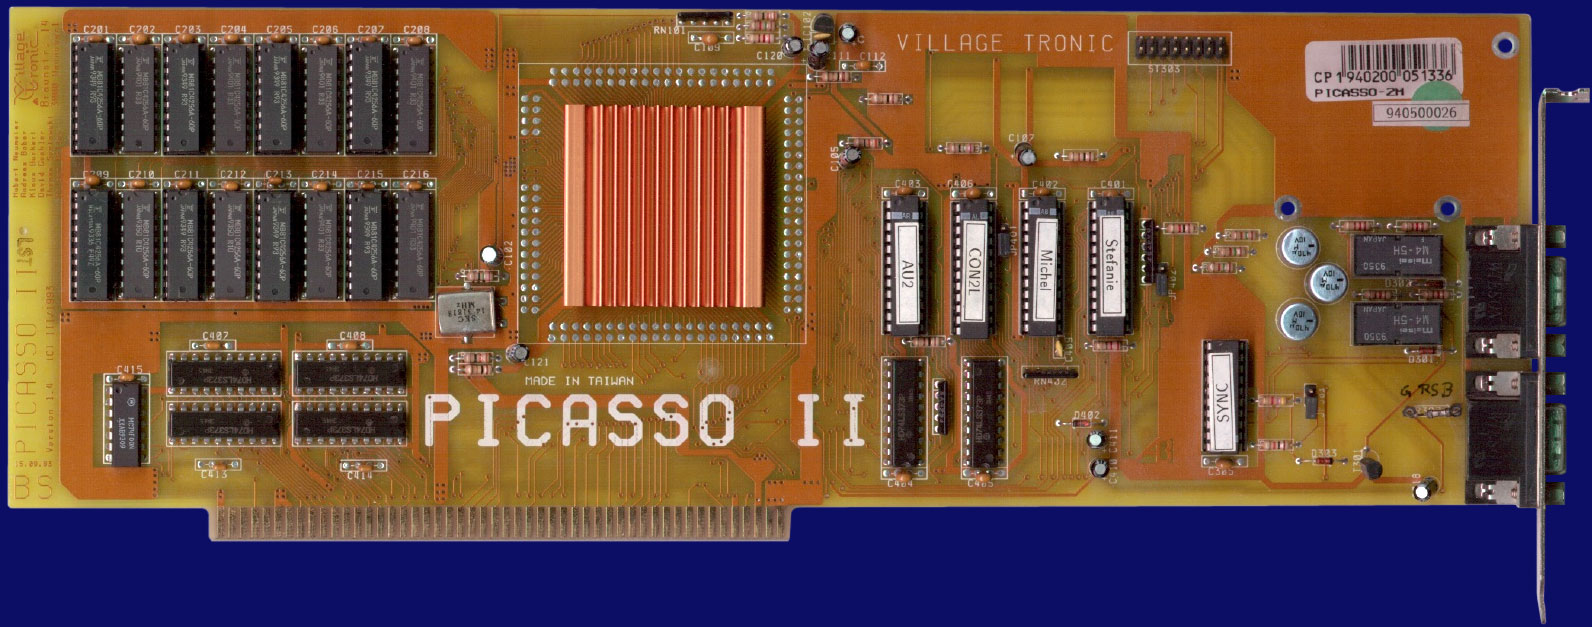 Village Tronic Picasso II - Rev 1.4, front side